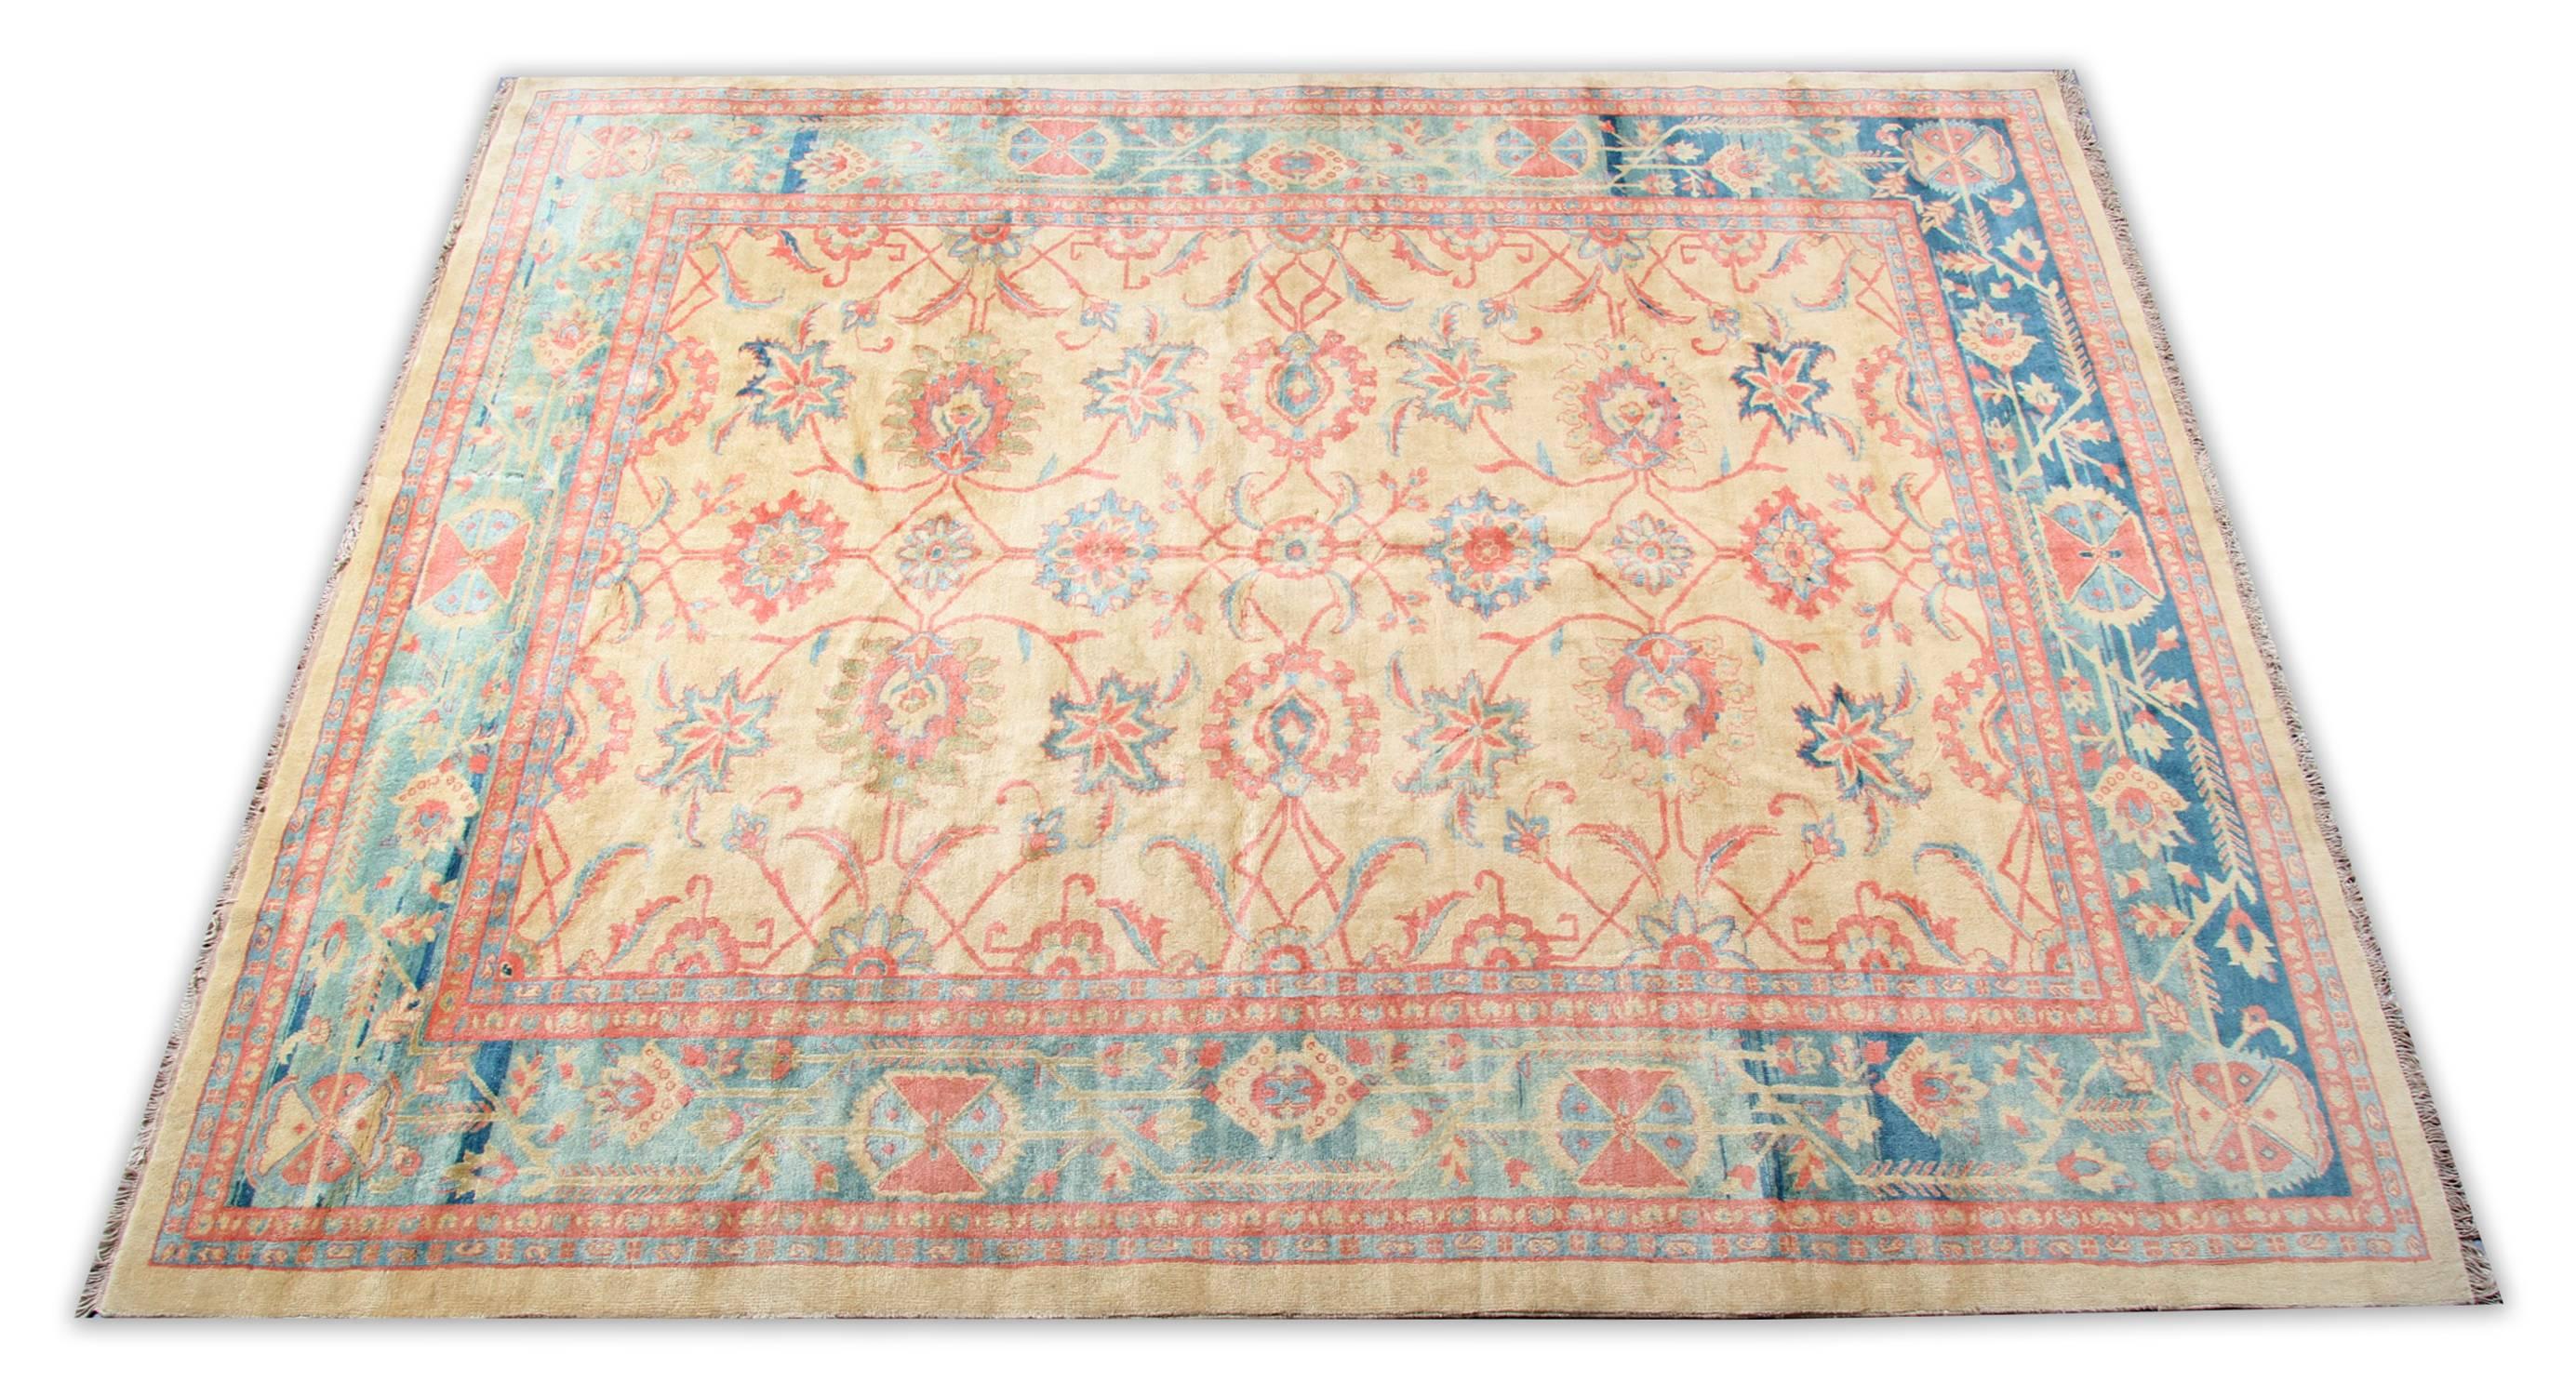 A 20th-century handmade carpet Ziegler Mahal woven rug. The gorgeous floral rug field is woven with indigo, crimson, gold and coral vegetable-dyed wool, on a shiny gold dyed, wool background. The carpet rug border is fantastic with a full central